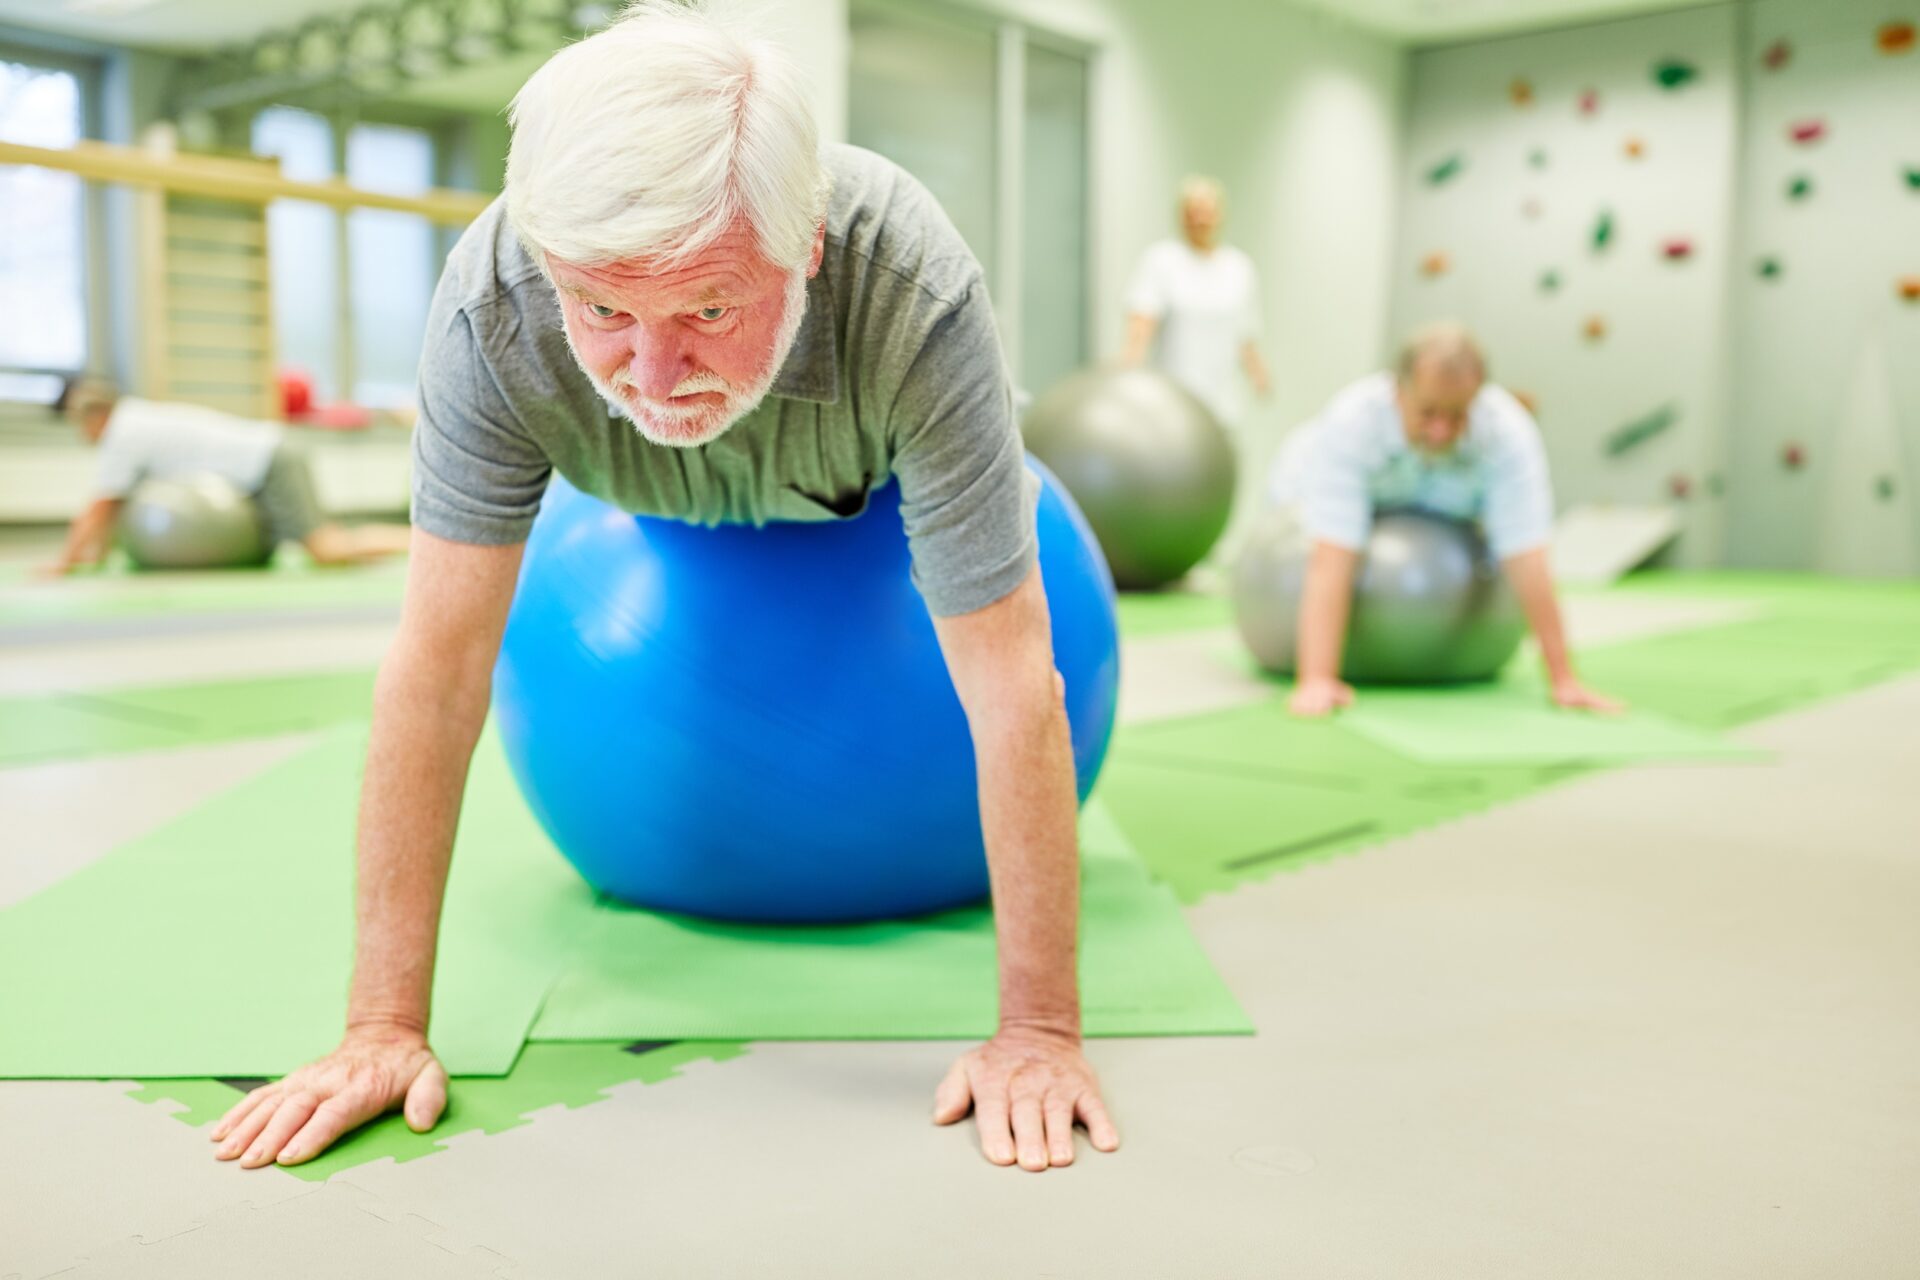 Two Fall Prevention Exercises